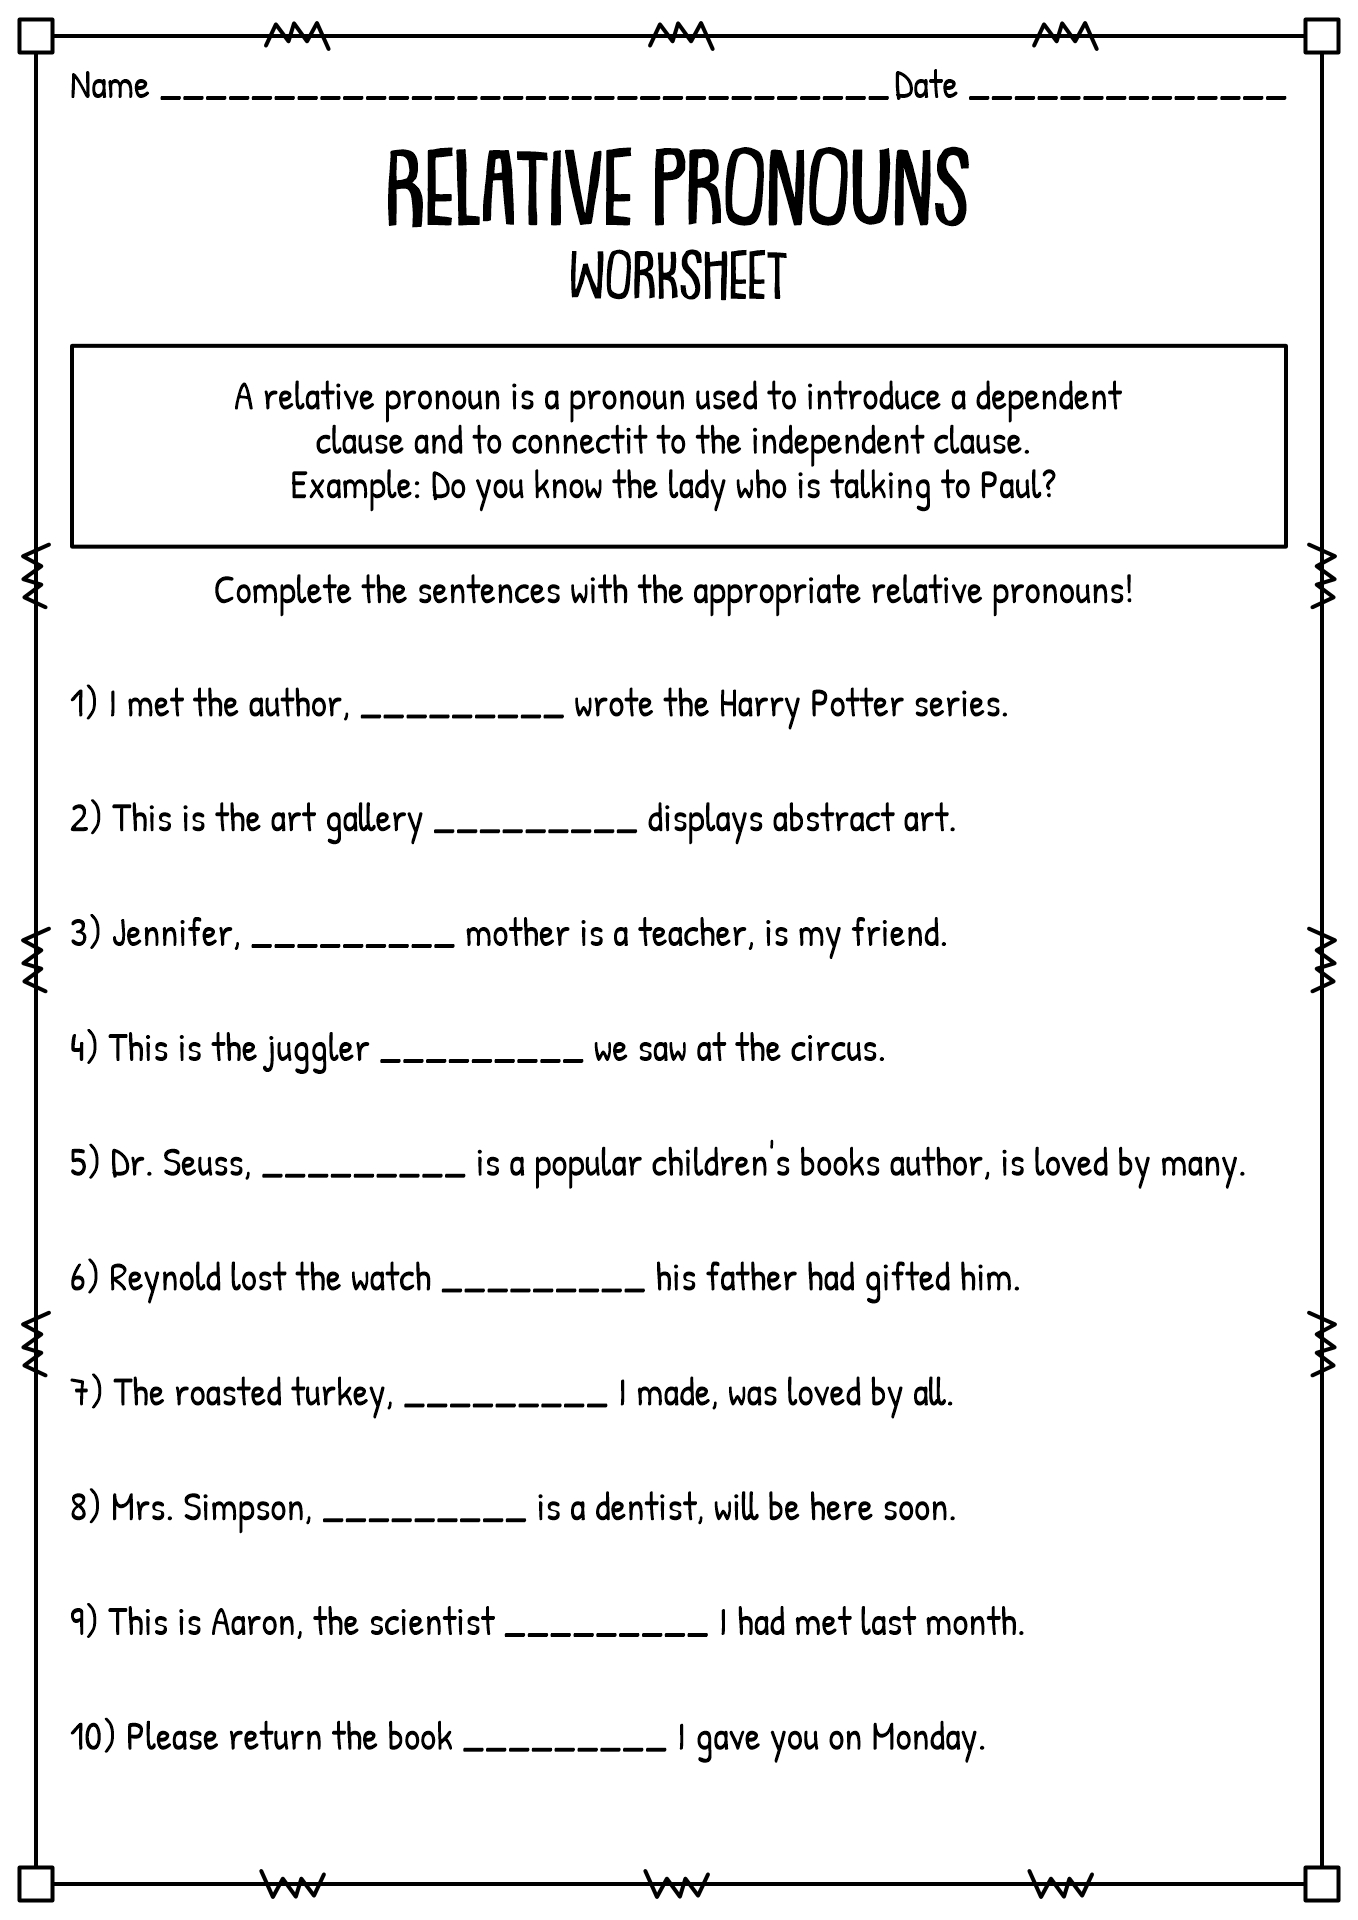 19 Best Images of Poetry Terms 5th Grade Worksheets - High ...